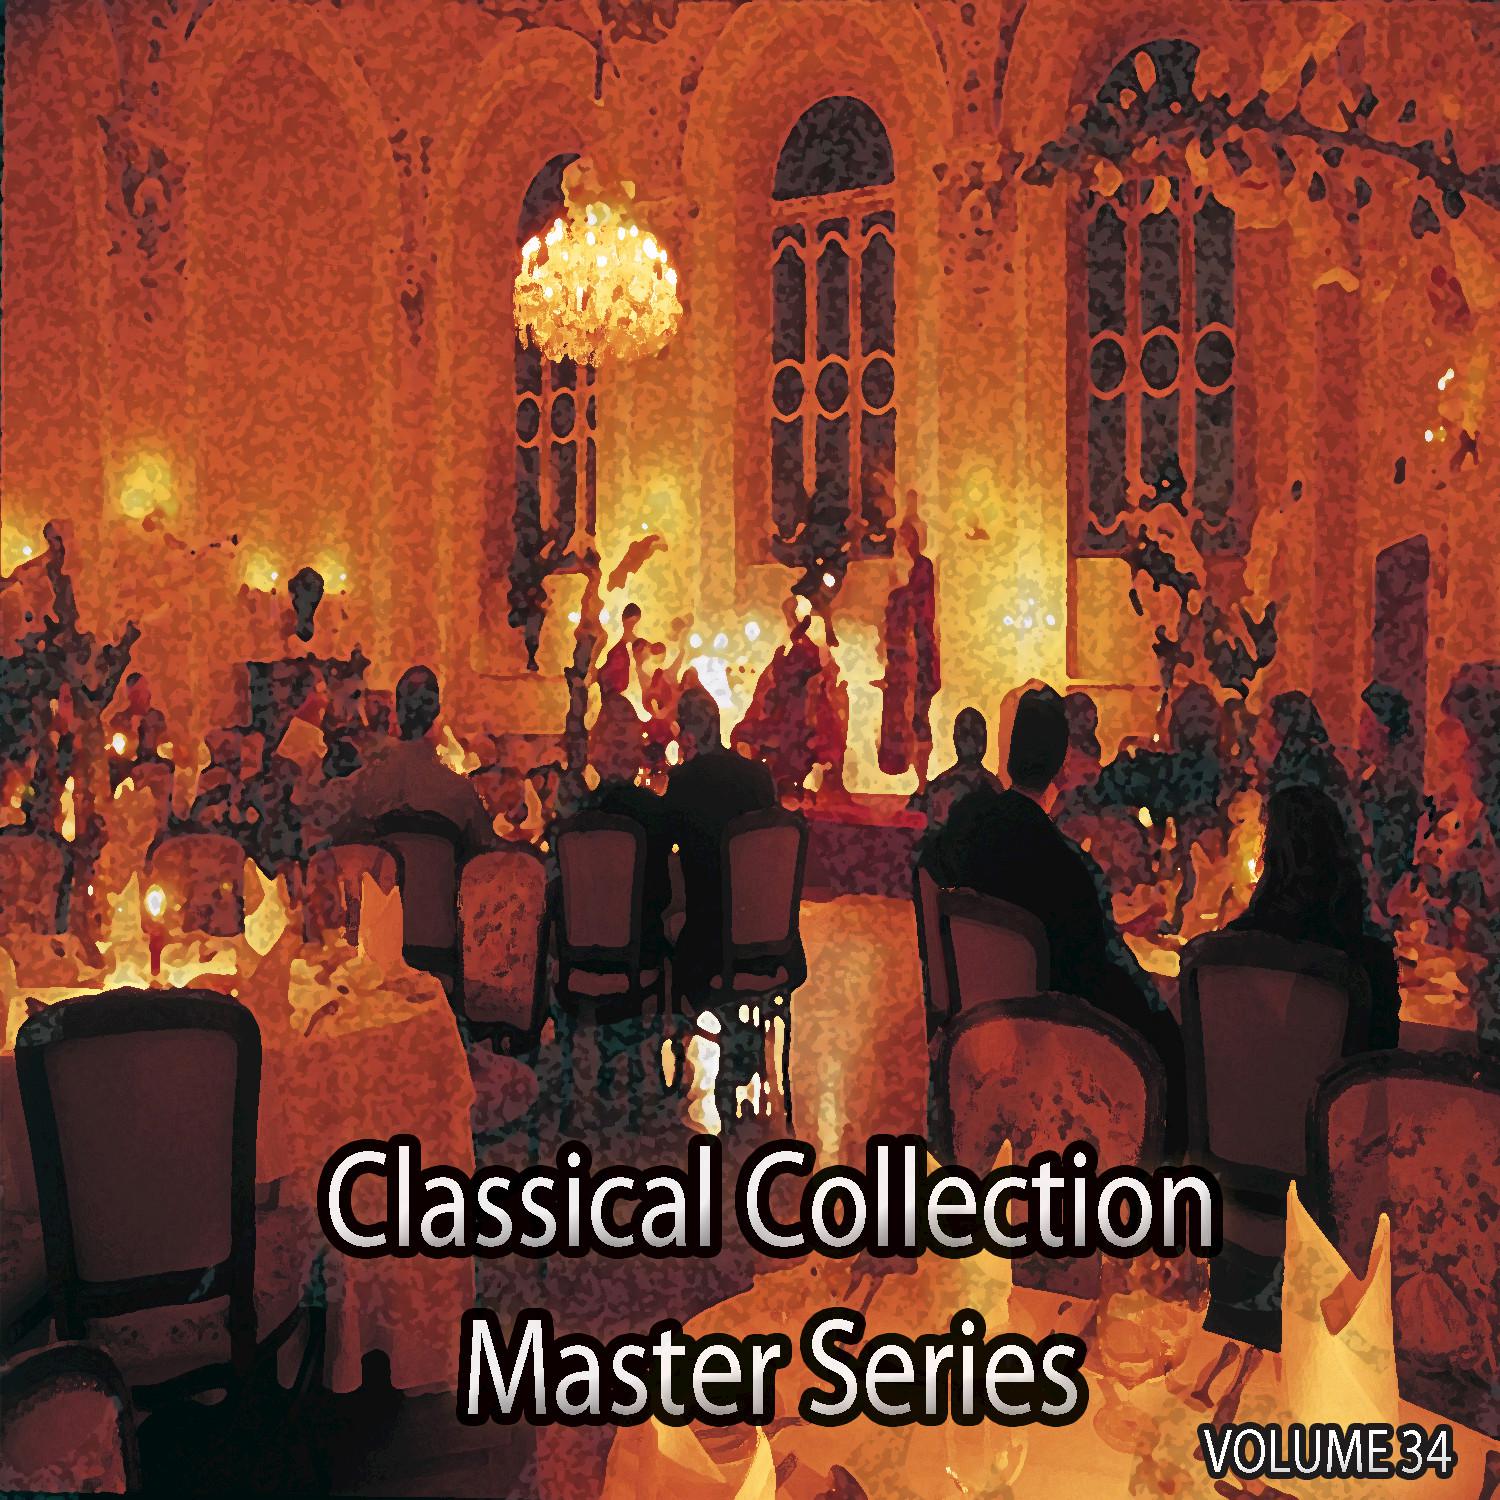 Concerto for Violin and Orchestra No. 1 in D, Op. 19: III. Moderato, Pt. 2